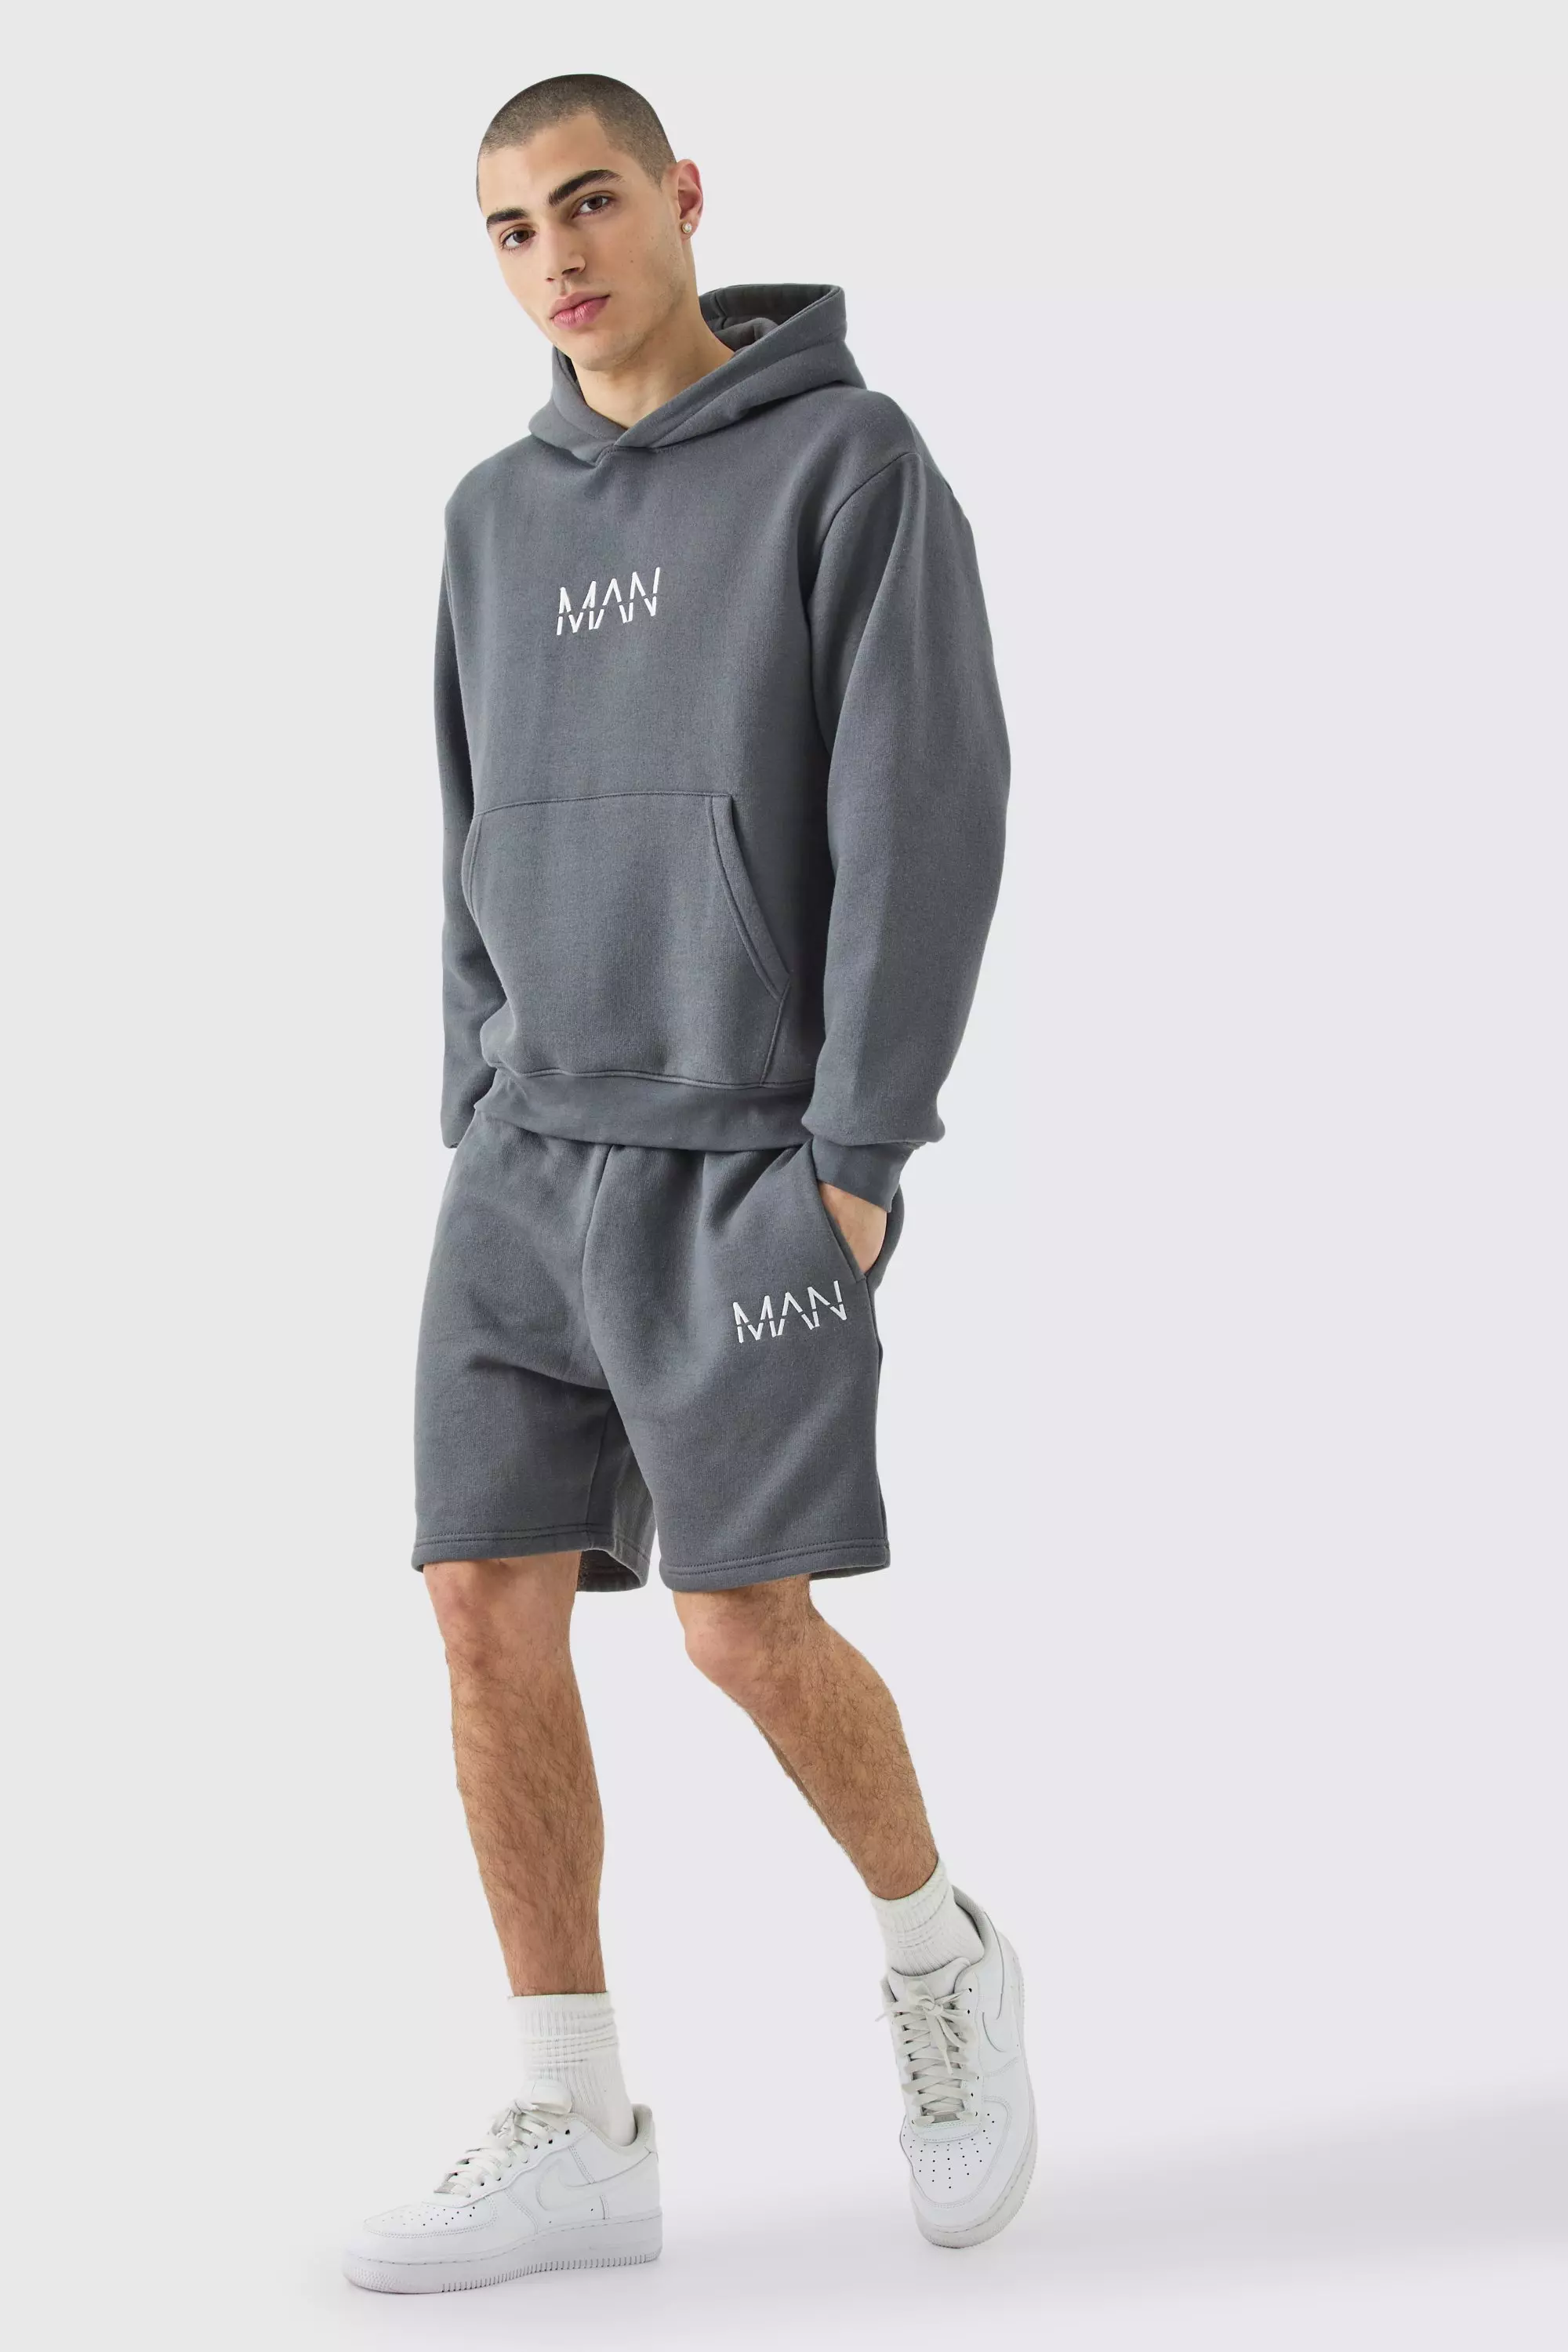 Charcoal Grey Man Boxy Hoodie Short Tracksuit